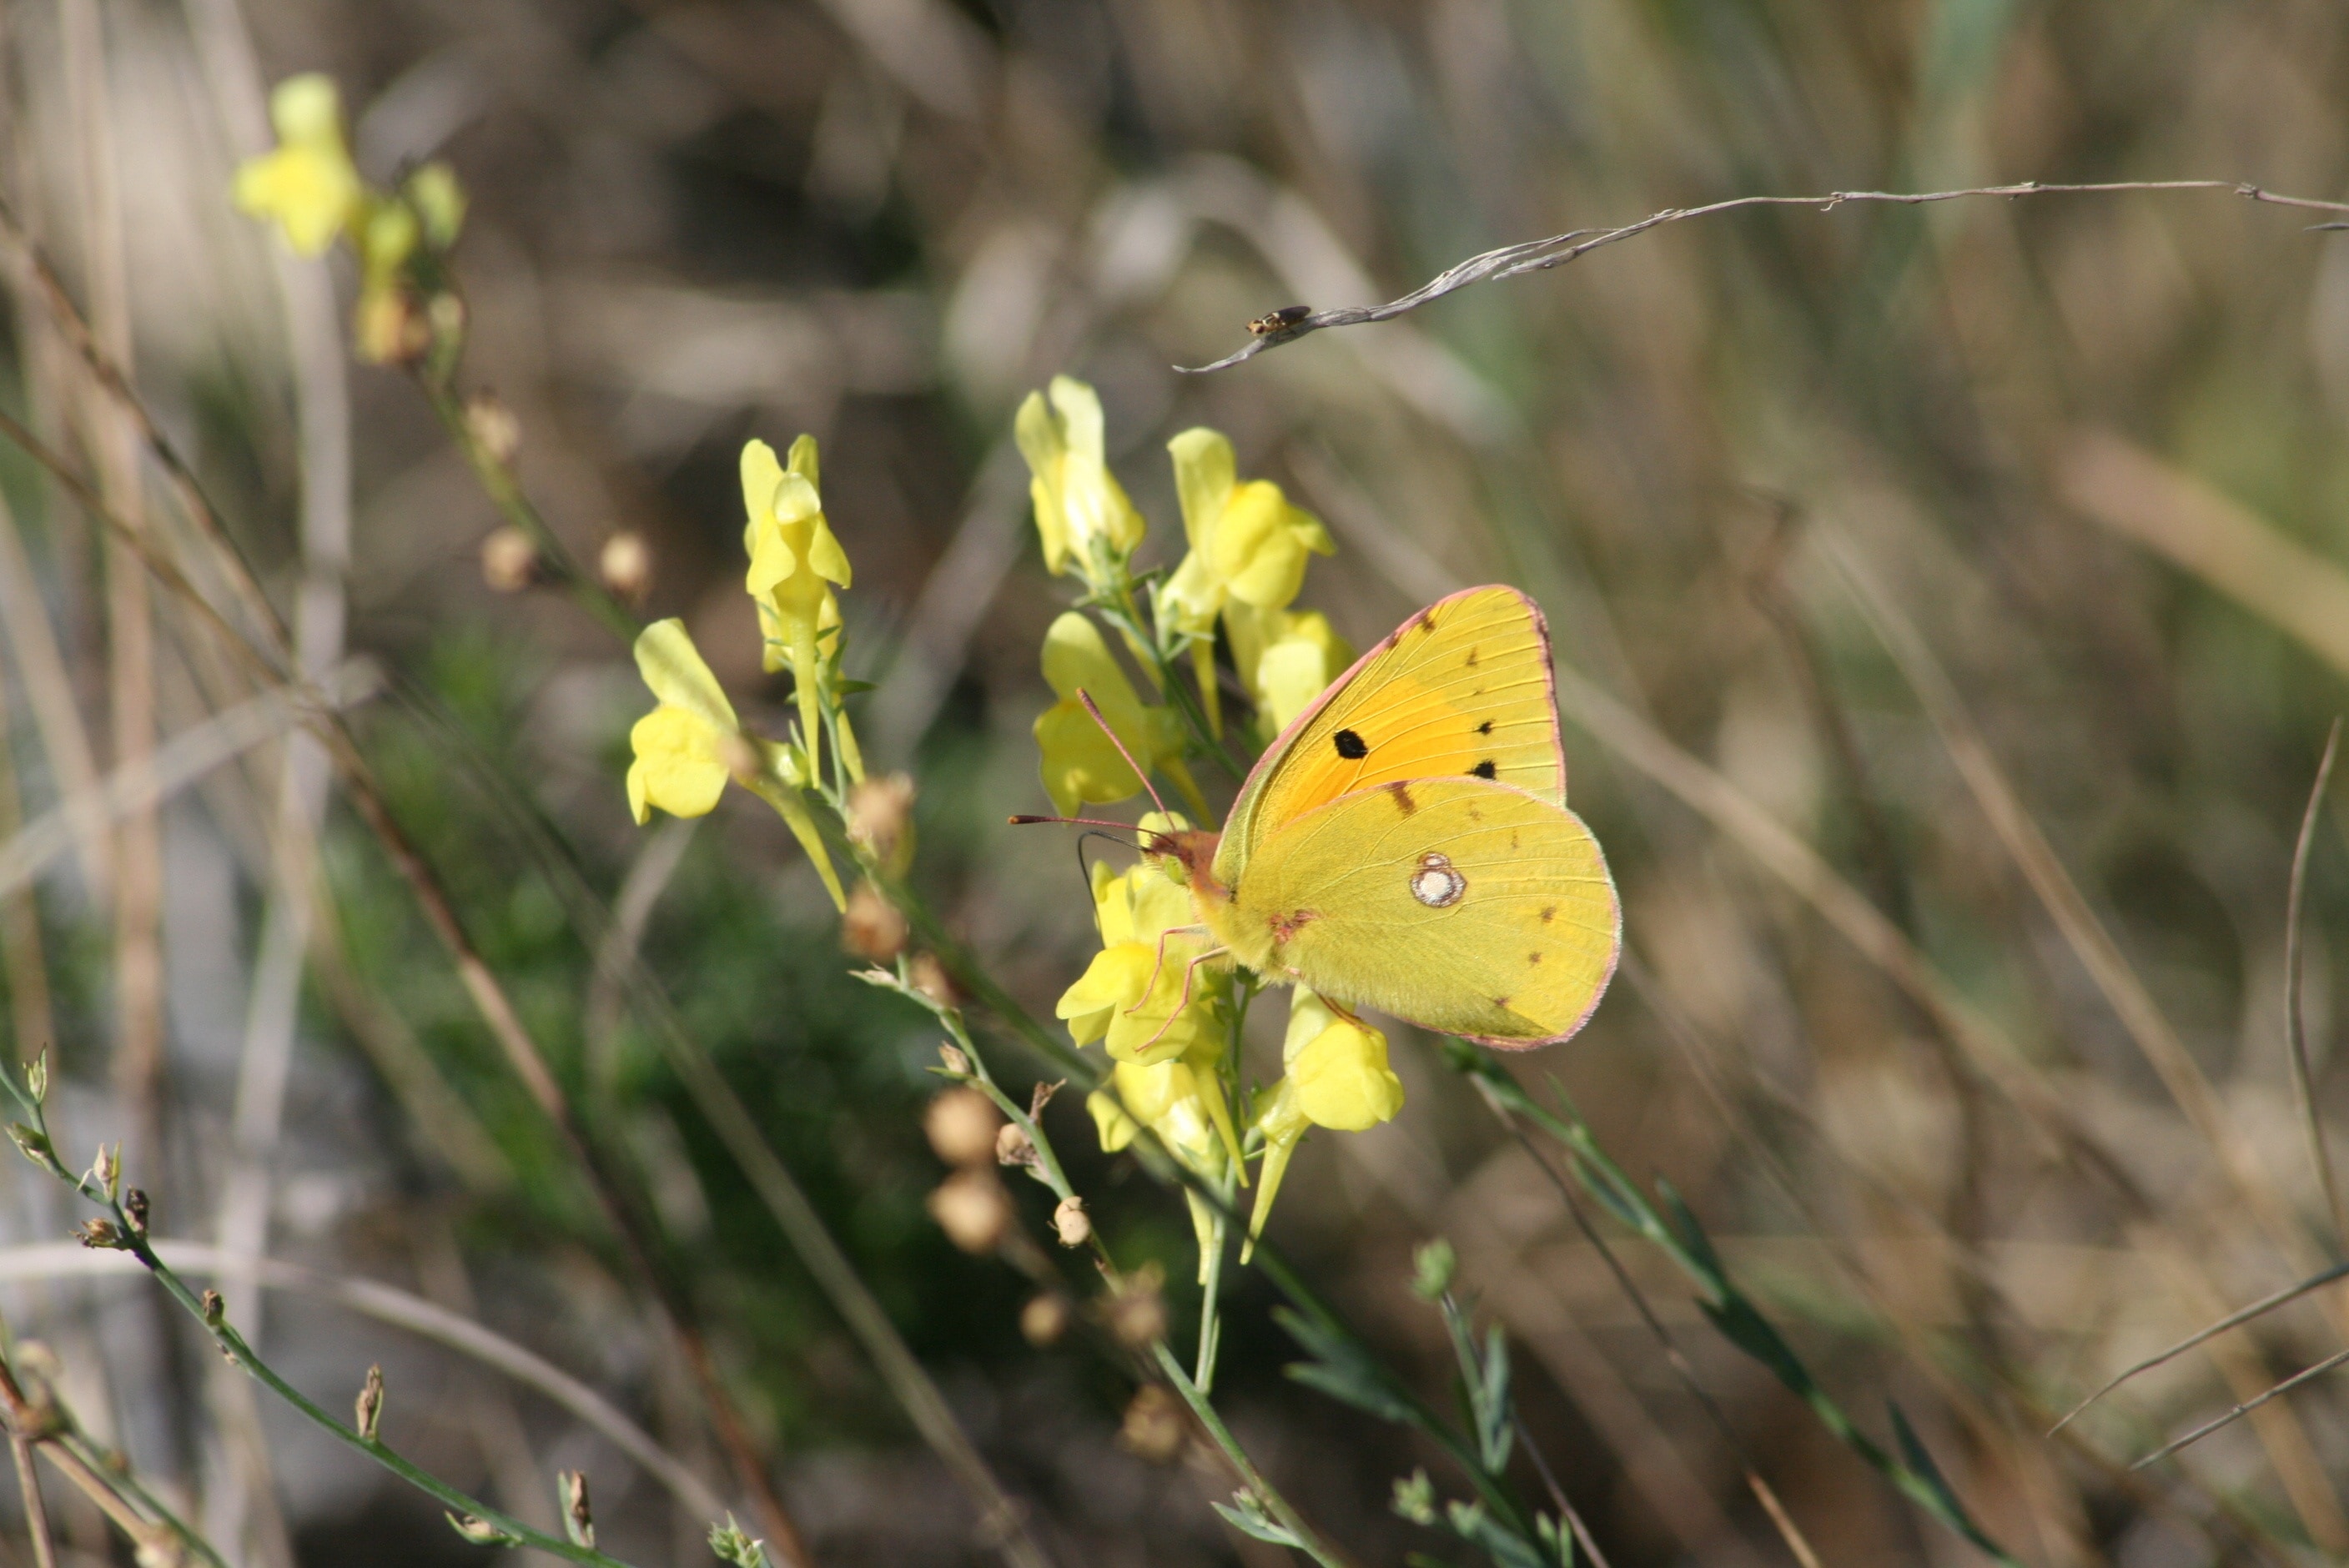 yellow cloudless butterfly on yellow petaled flower